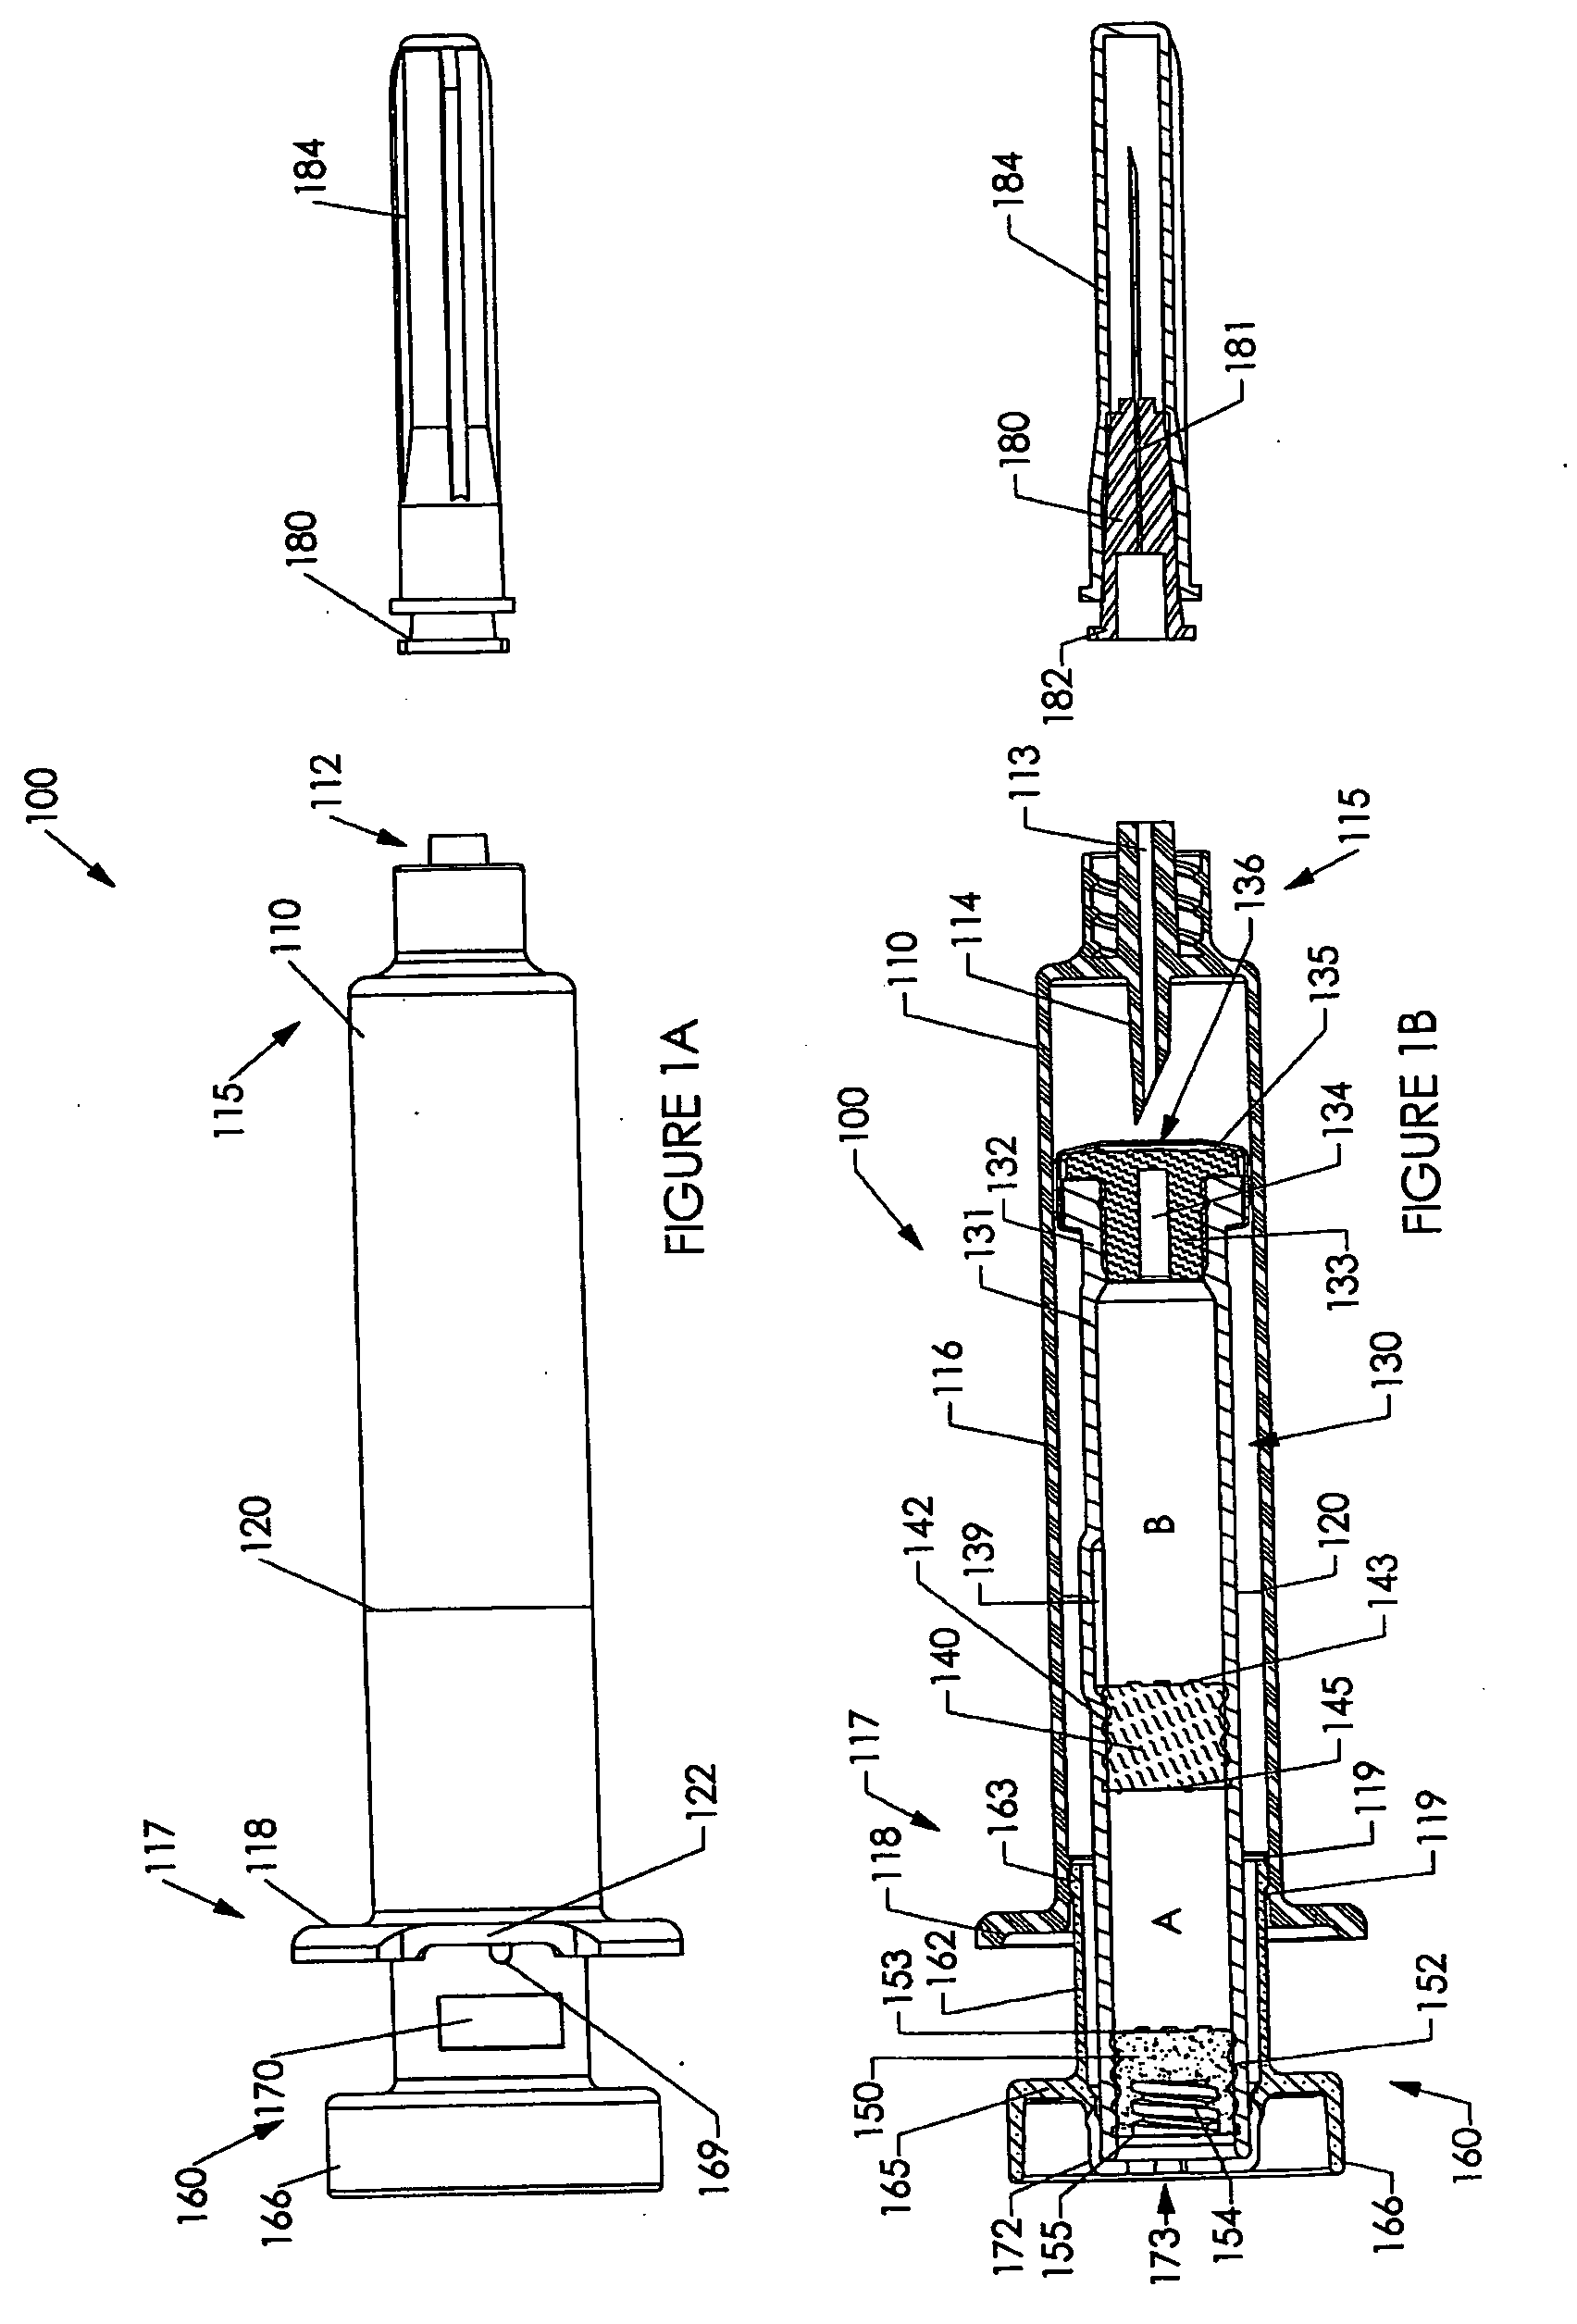 Extensible plunger rod for pharmaceutical delivery device